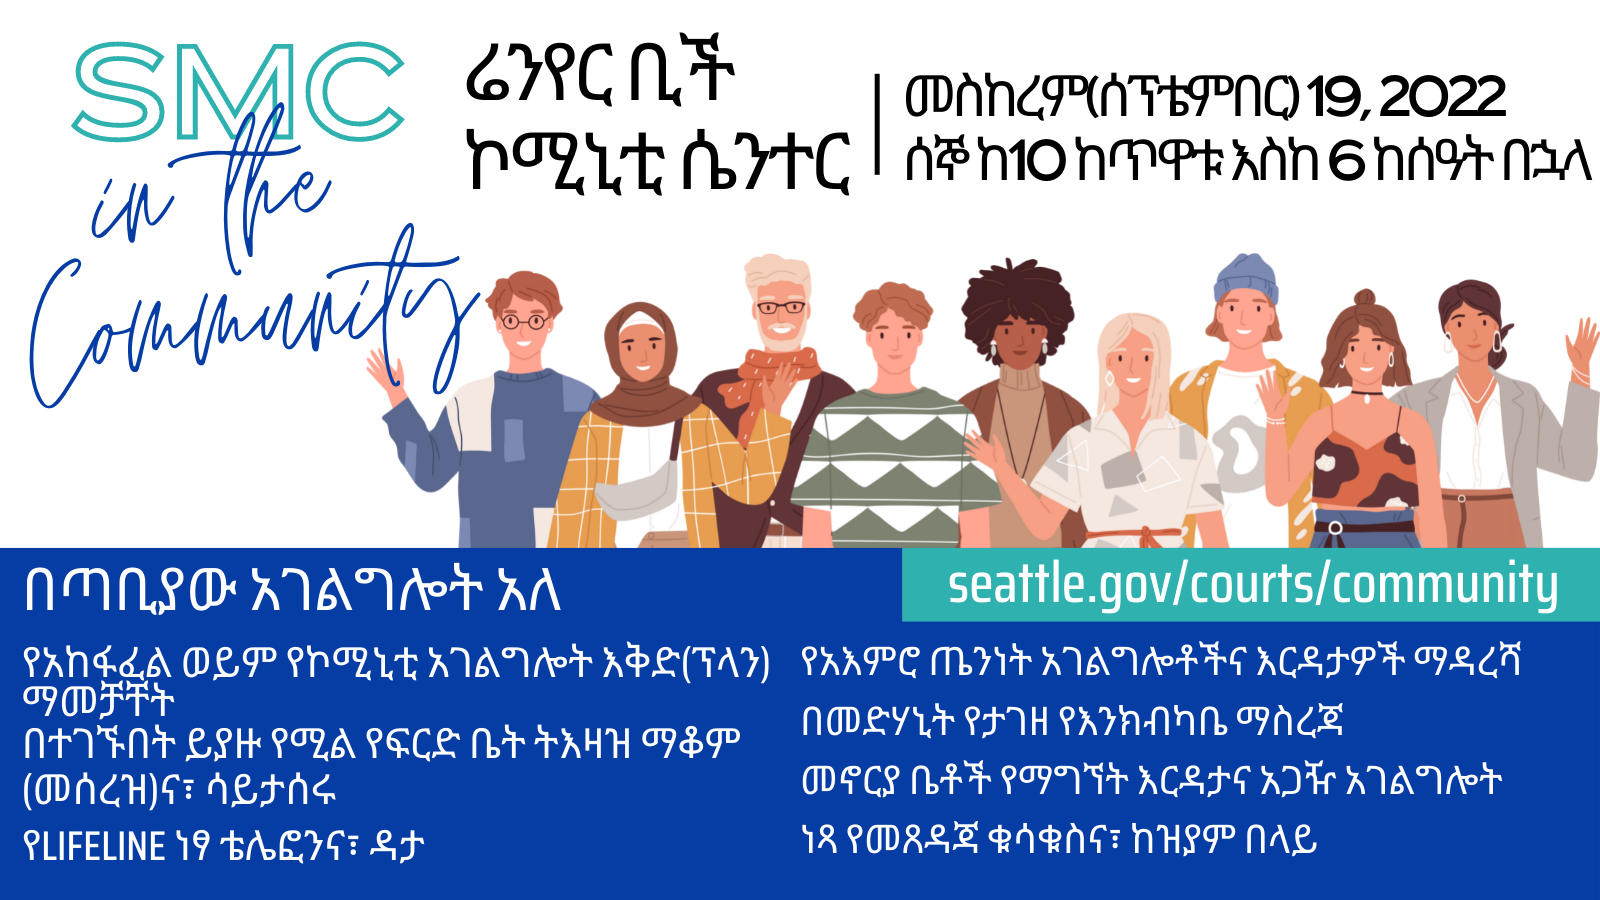 SMC in the Community event banner with a group of smiling and waving cartoon people and event info in Amharic